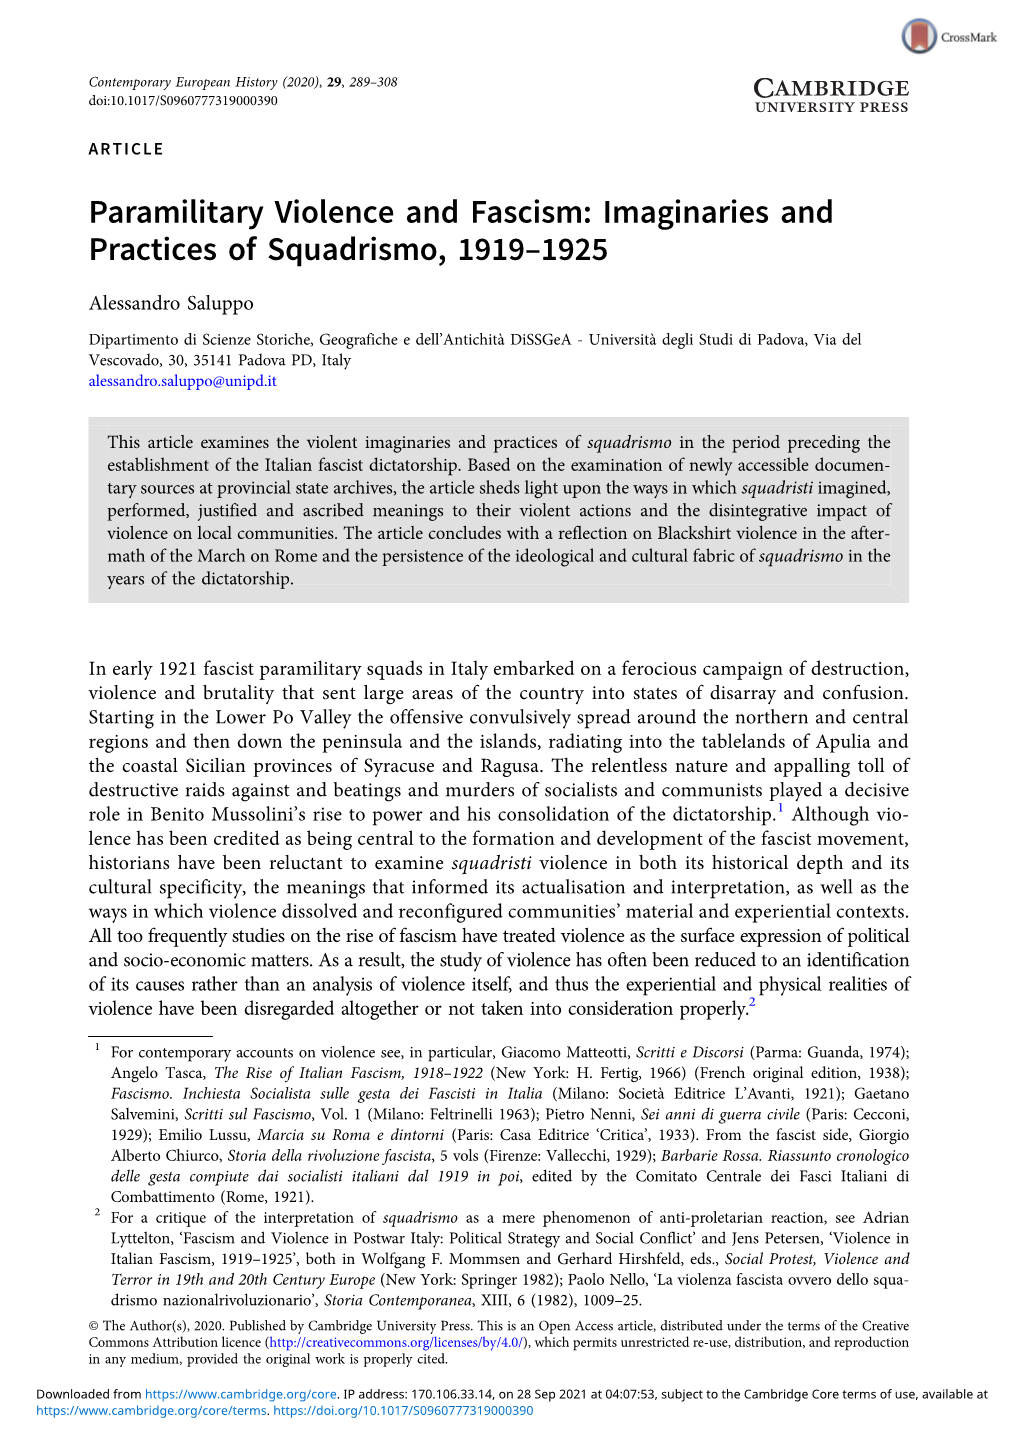 Paramilitary Violence and Fascism: Imaginaries and Practices of Squadrismo, 1919–1925